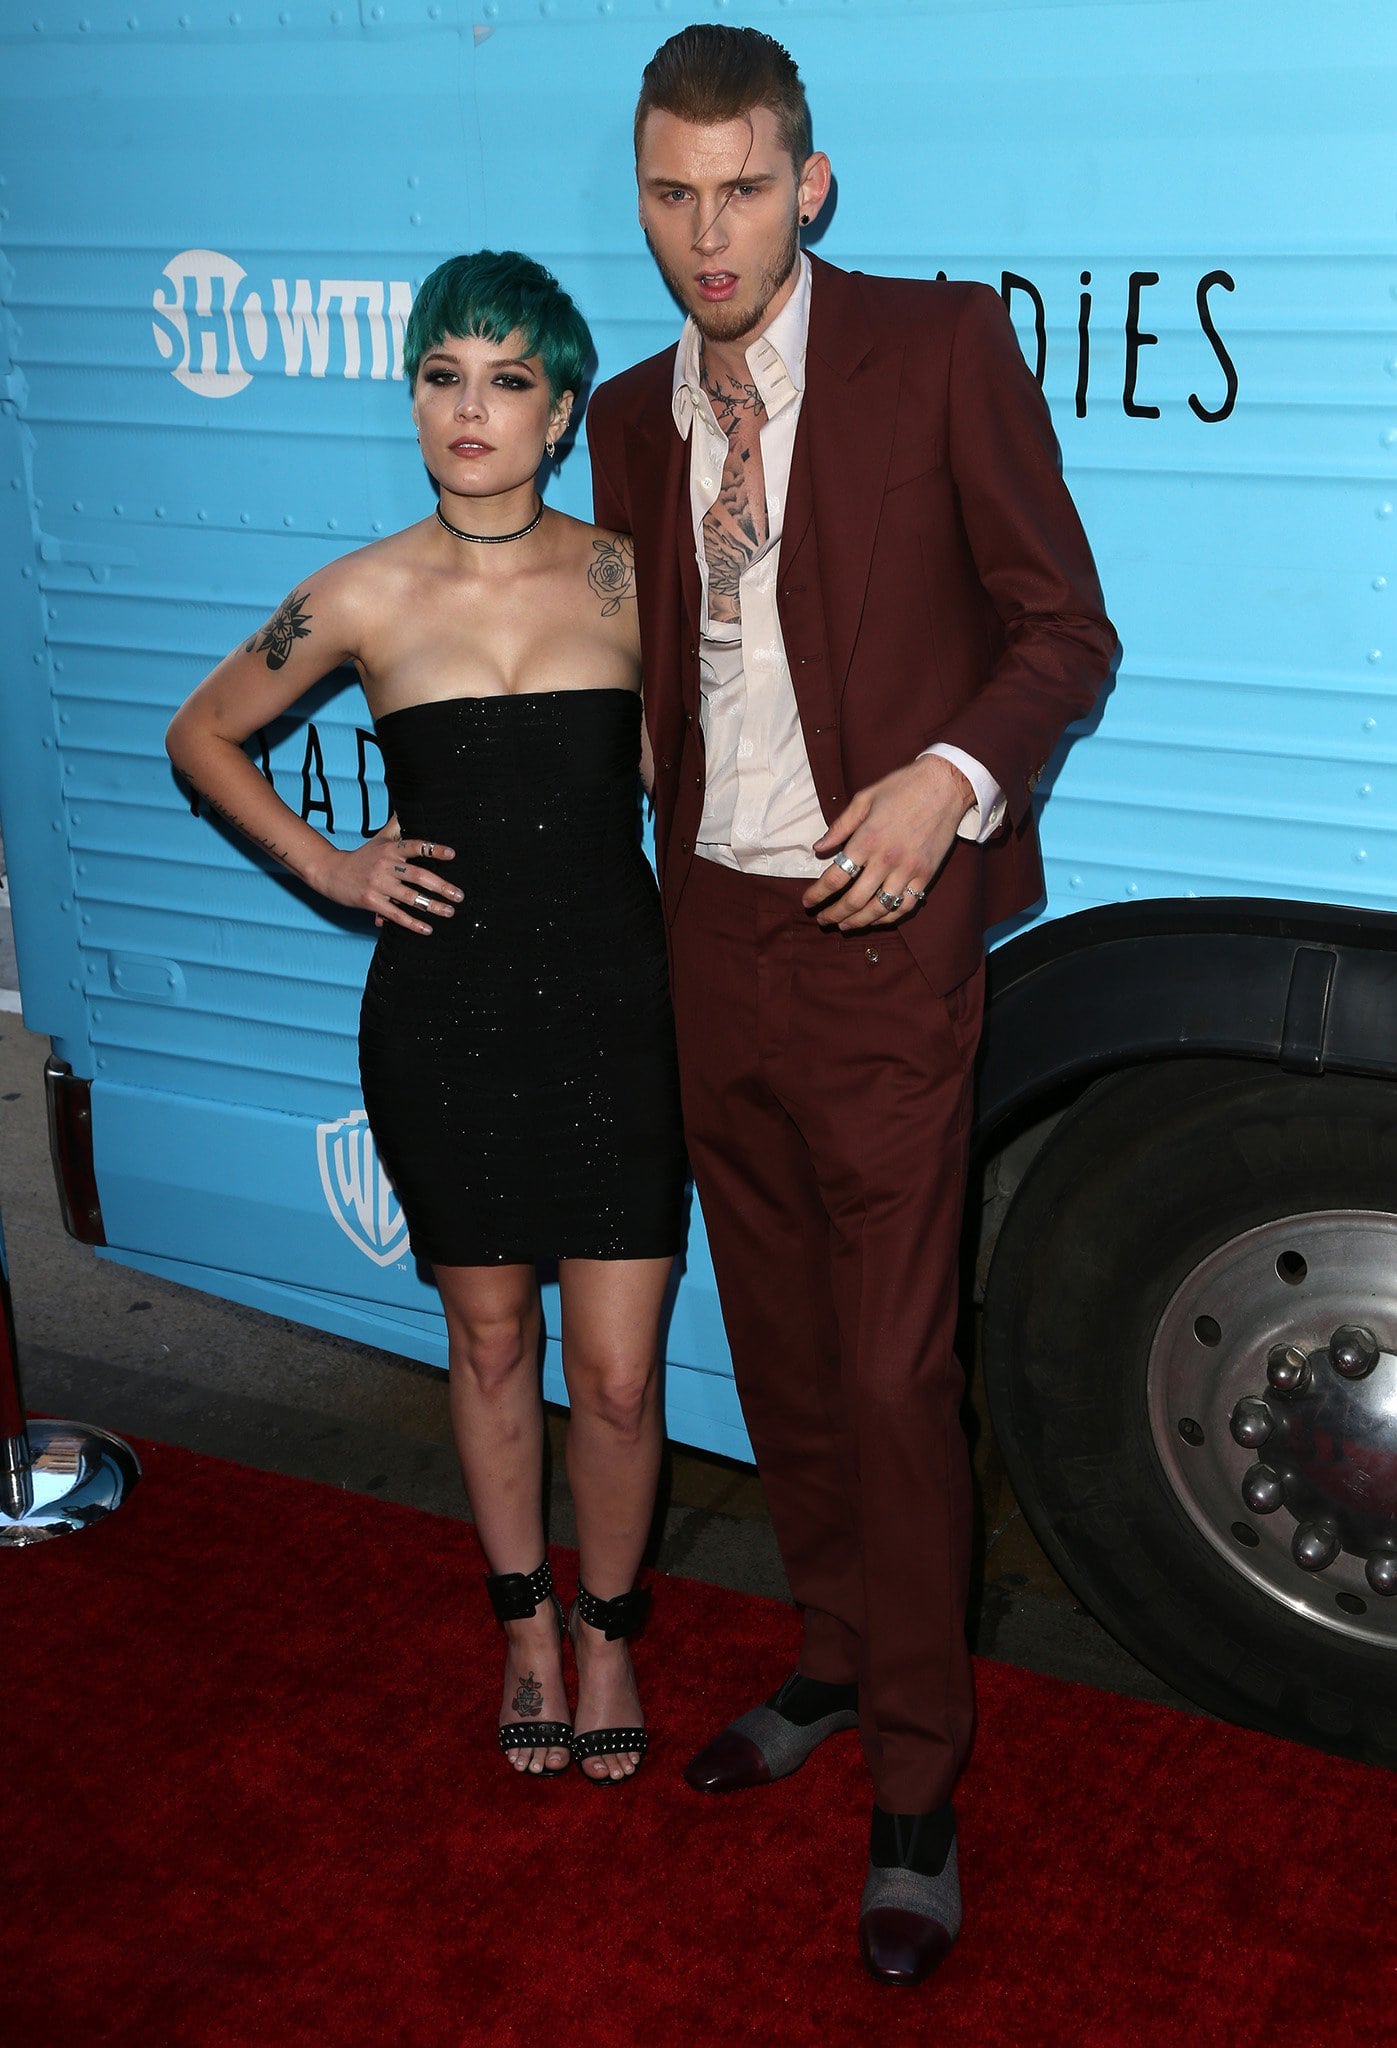 Halsey and Machine Gun Kelly walked the red carpet together for Roadies premiere on June 7, 2016